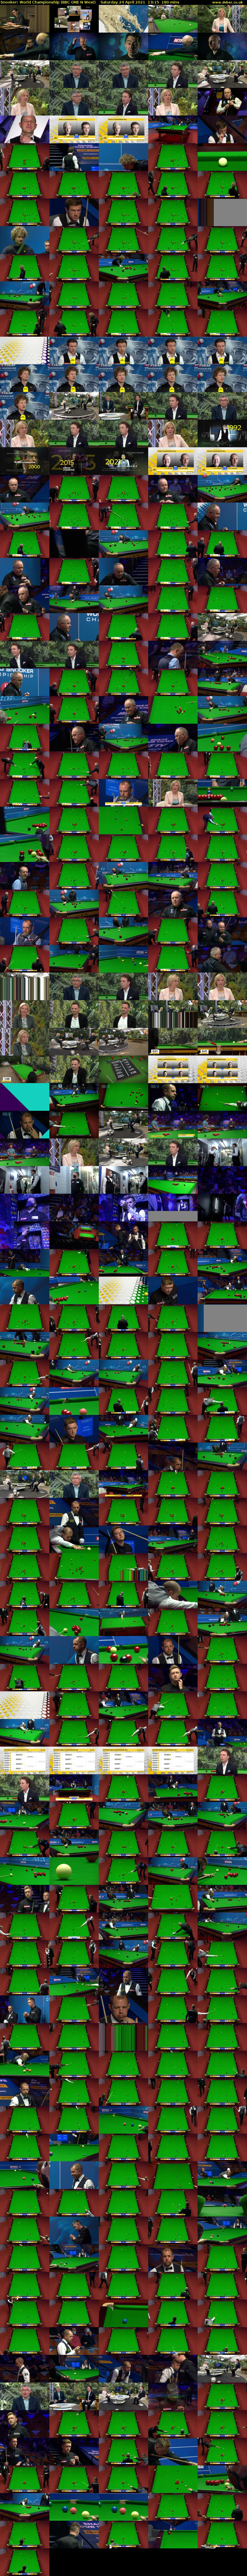 Snooker: World Championship (BBC ONE N West) Saturday 24 April 2021 13:15 - 16:15